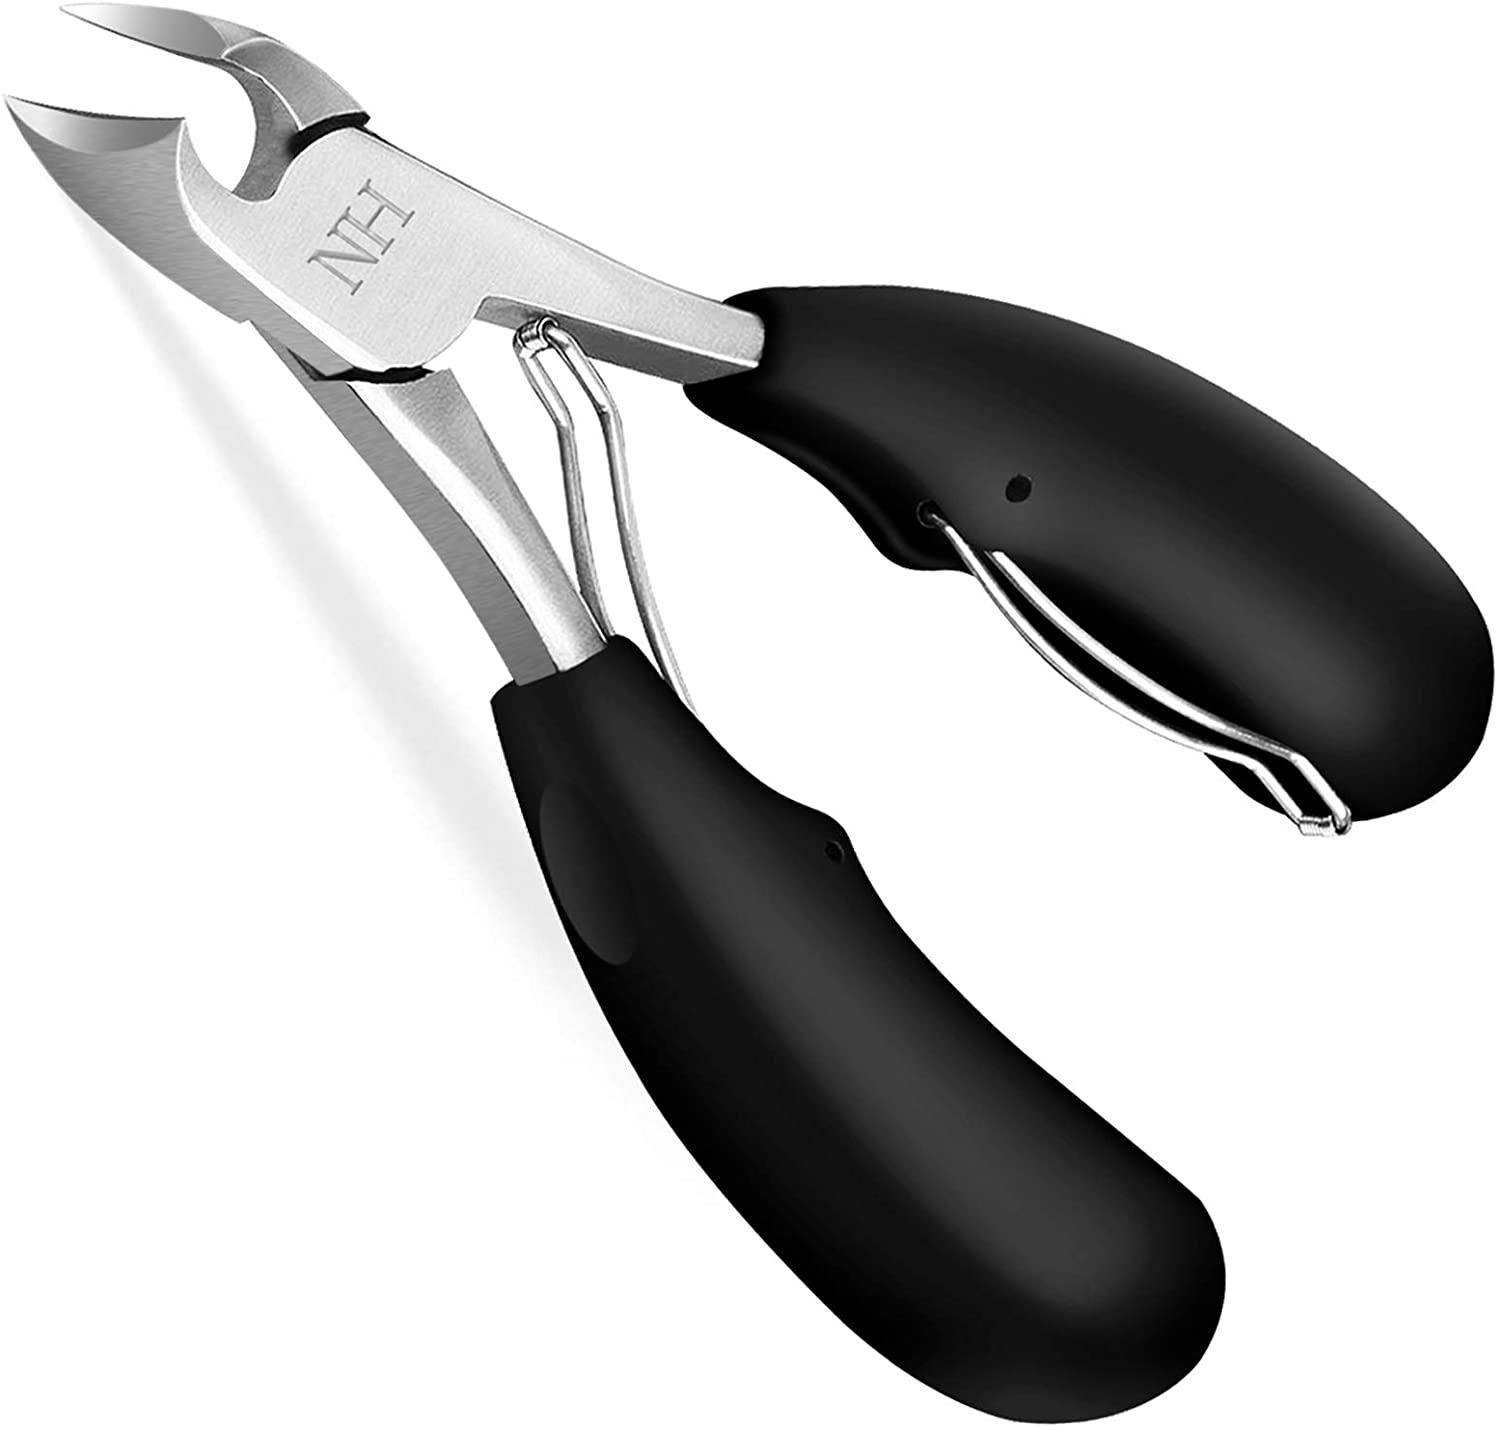 New Huing Podiatrist Toenail Clippers with Molded Handles for $10.44